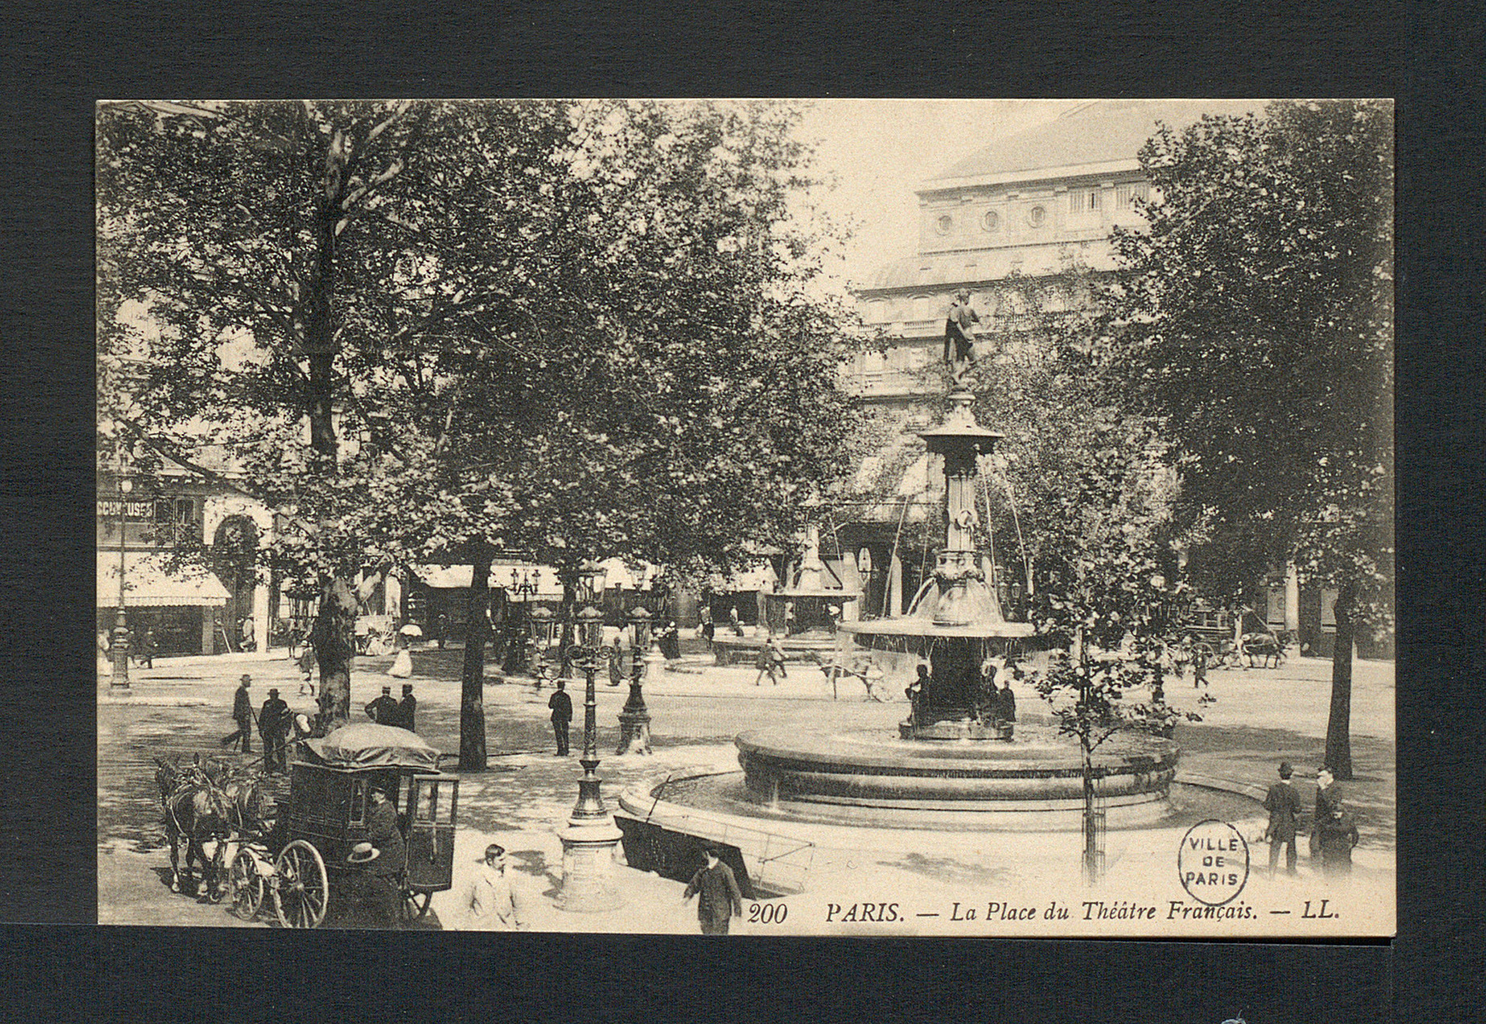 A black and white photograph of a round fountain surrounded by people and trees. In the background, there is a road with buildings that are aligned against it.